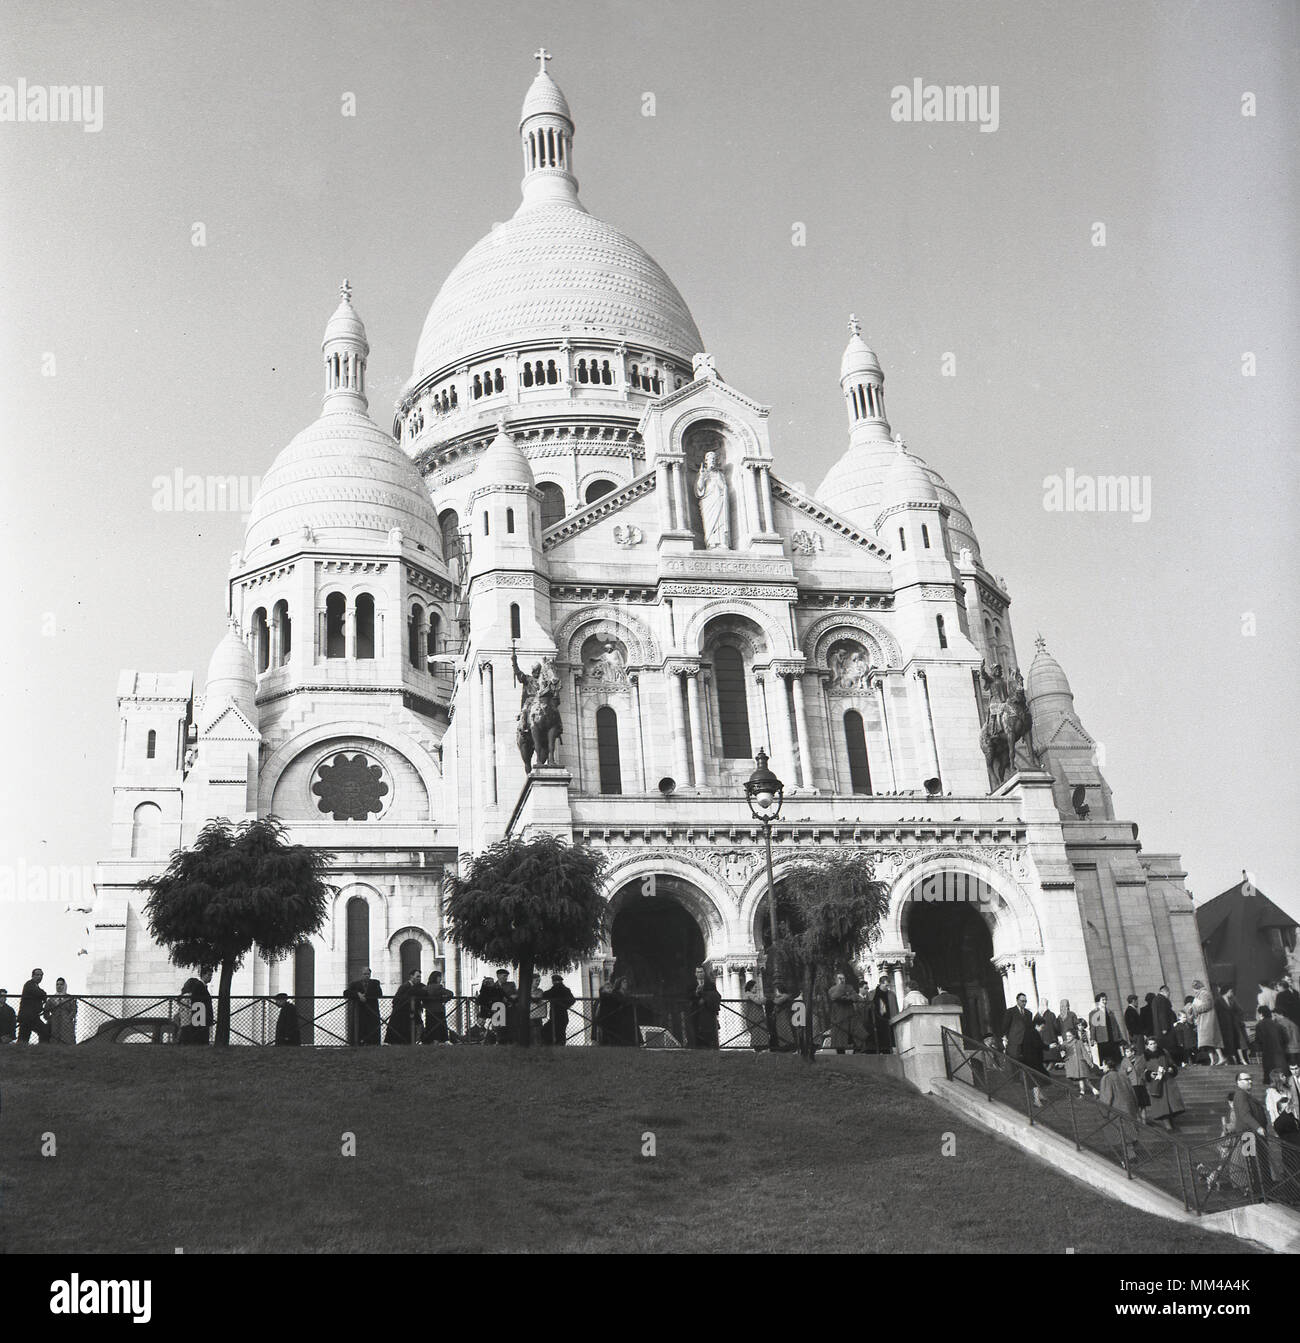 1950s, historical picture of the Basilica of the Sacred Heart of Paris, more commonly known simply as Sacre-Coeur a Roman Catholic built on top of the hill of Montmartre, Paris, France.